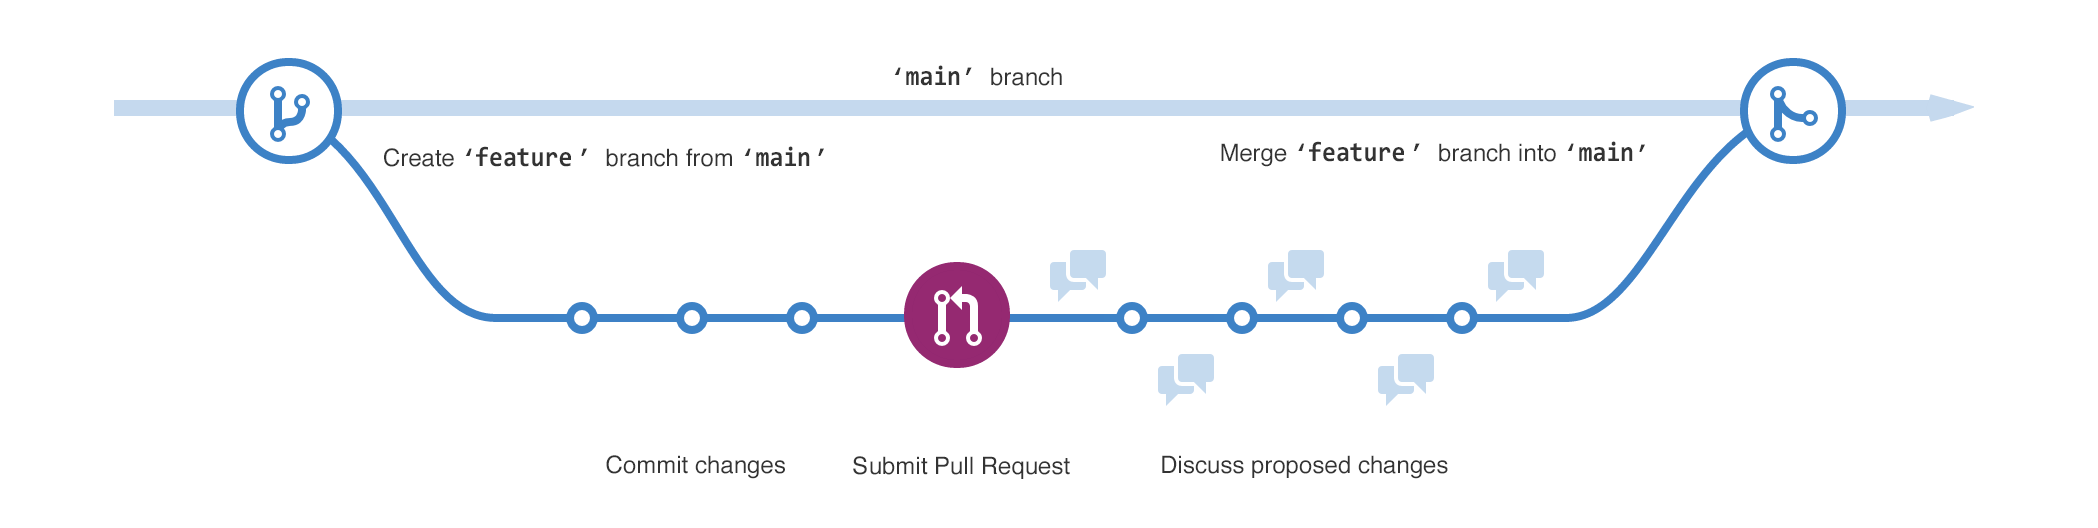 Diagram of the two branches. The "feature" branch diverges from the "main" branch, goes through stages for "Commit changes," "Submit pull request," and "Discuss proposed changes," and is then merged back into main.